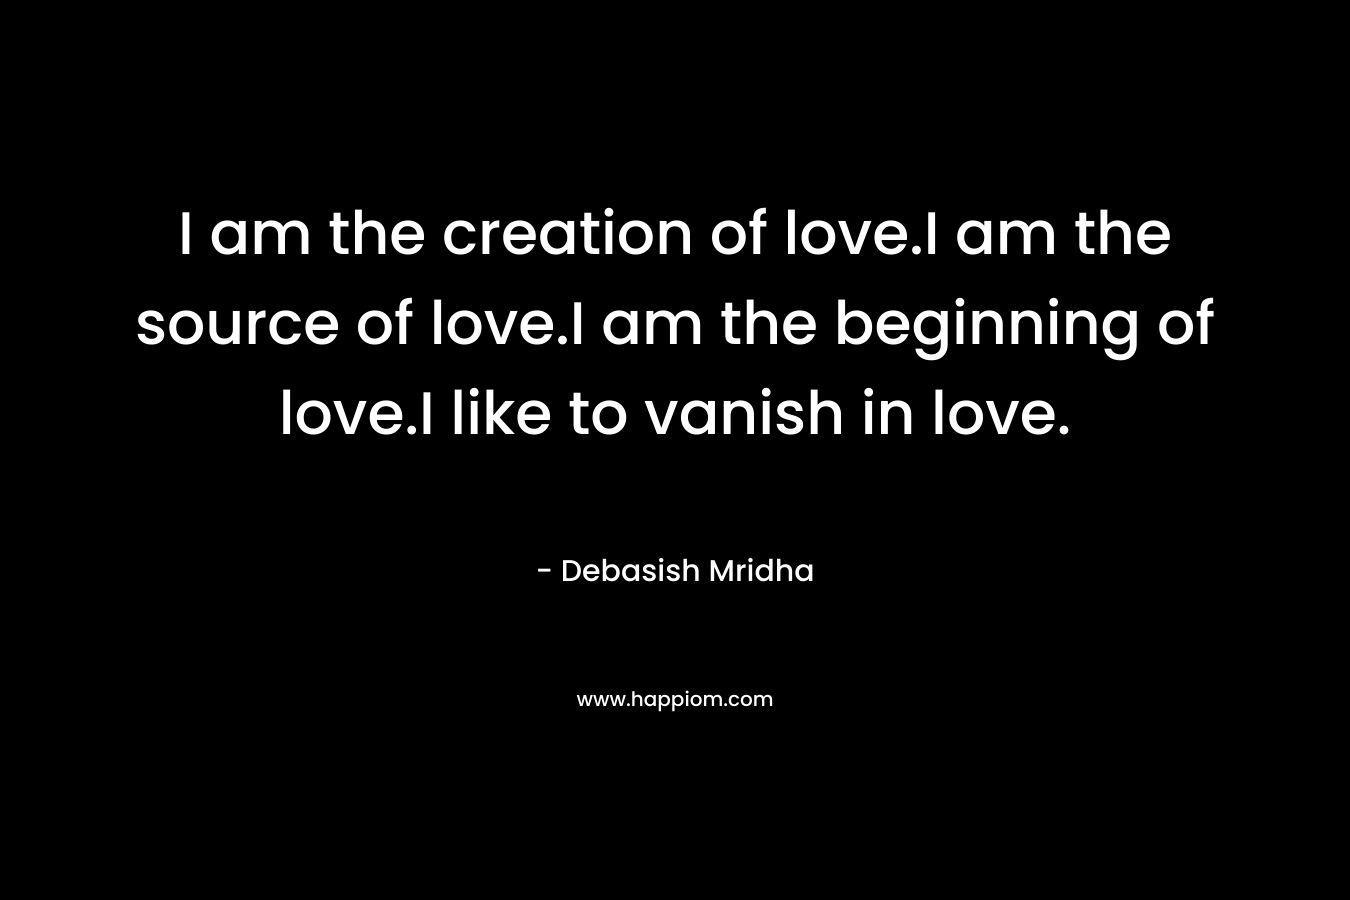 I am the creation of love.I am the source of love.I am the beginning of love.I like to vanish in love.